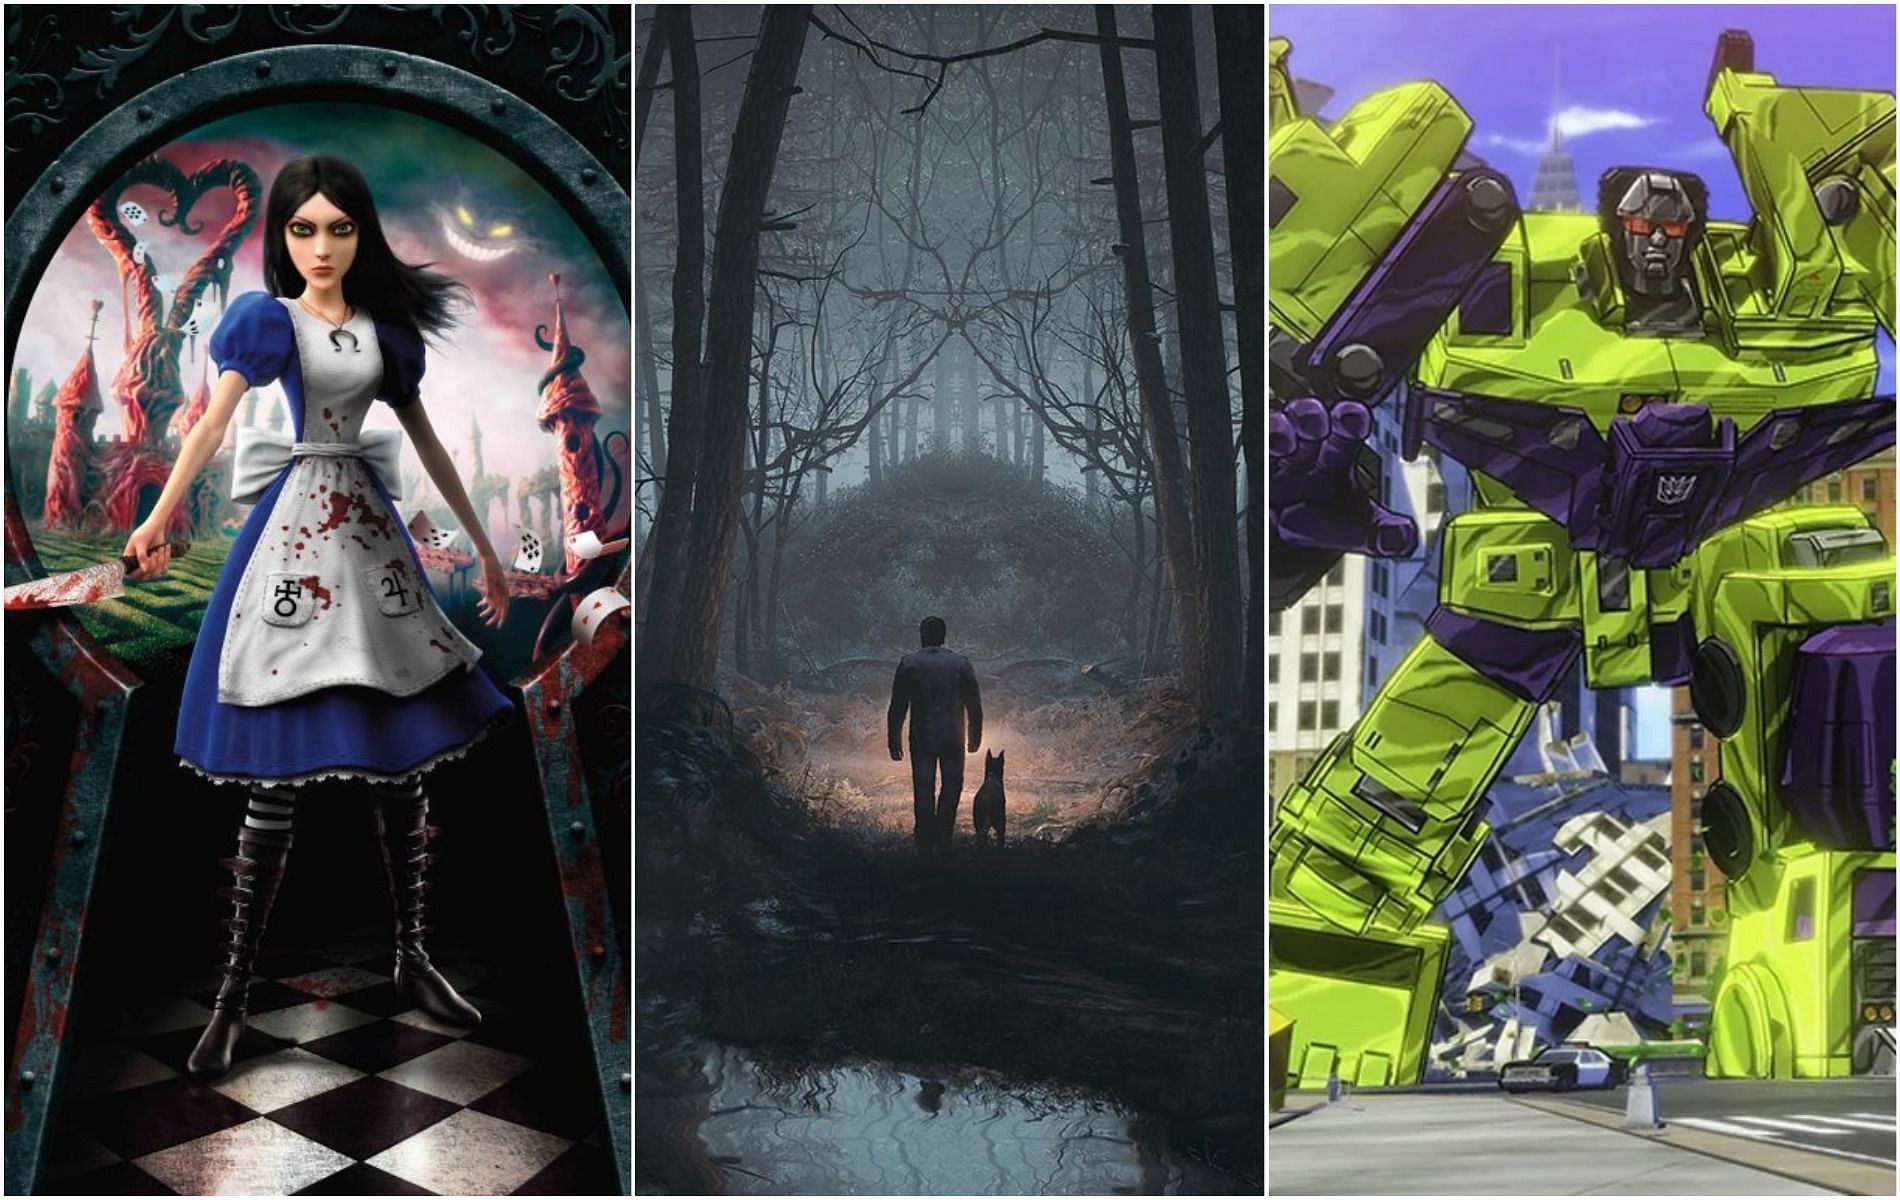 These are cult clssic titles (Images via EA/Lionsgate/Activision)